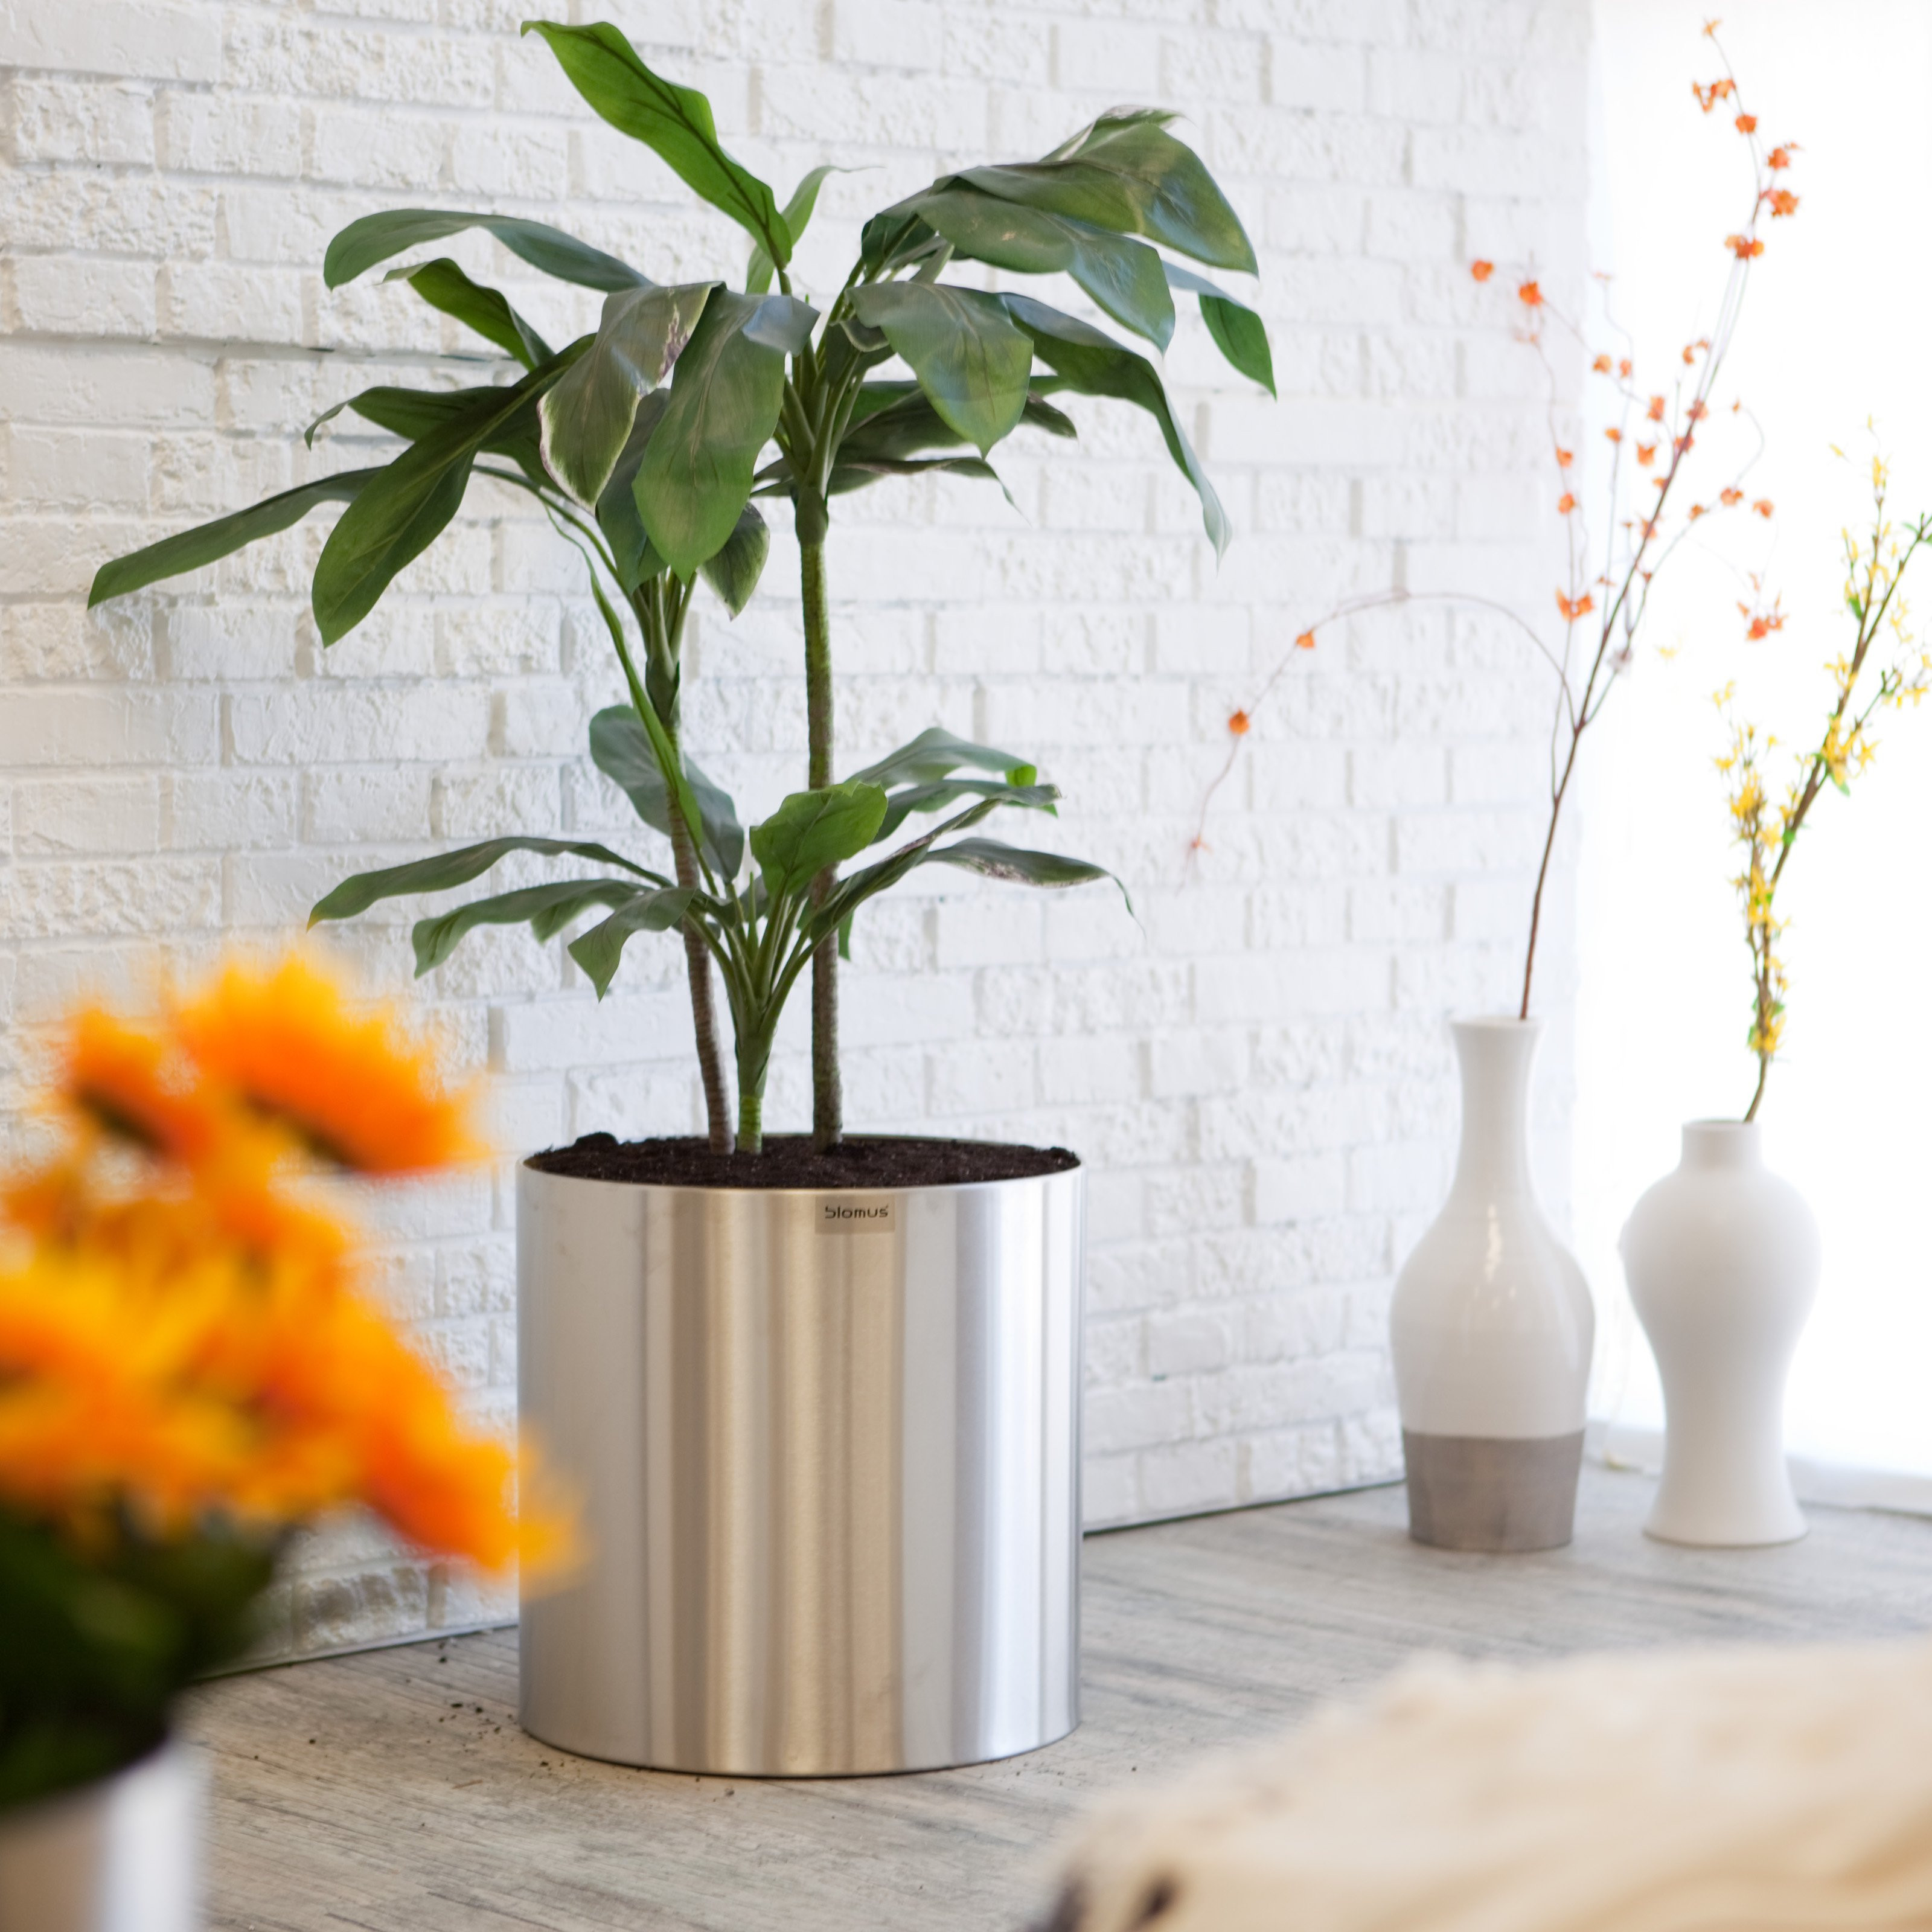 Best ideas about Indoor Planter Pots
. Save or Pin Round Stainless Steel Blumentopf Planter Planters Now.